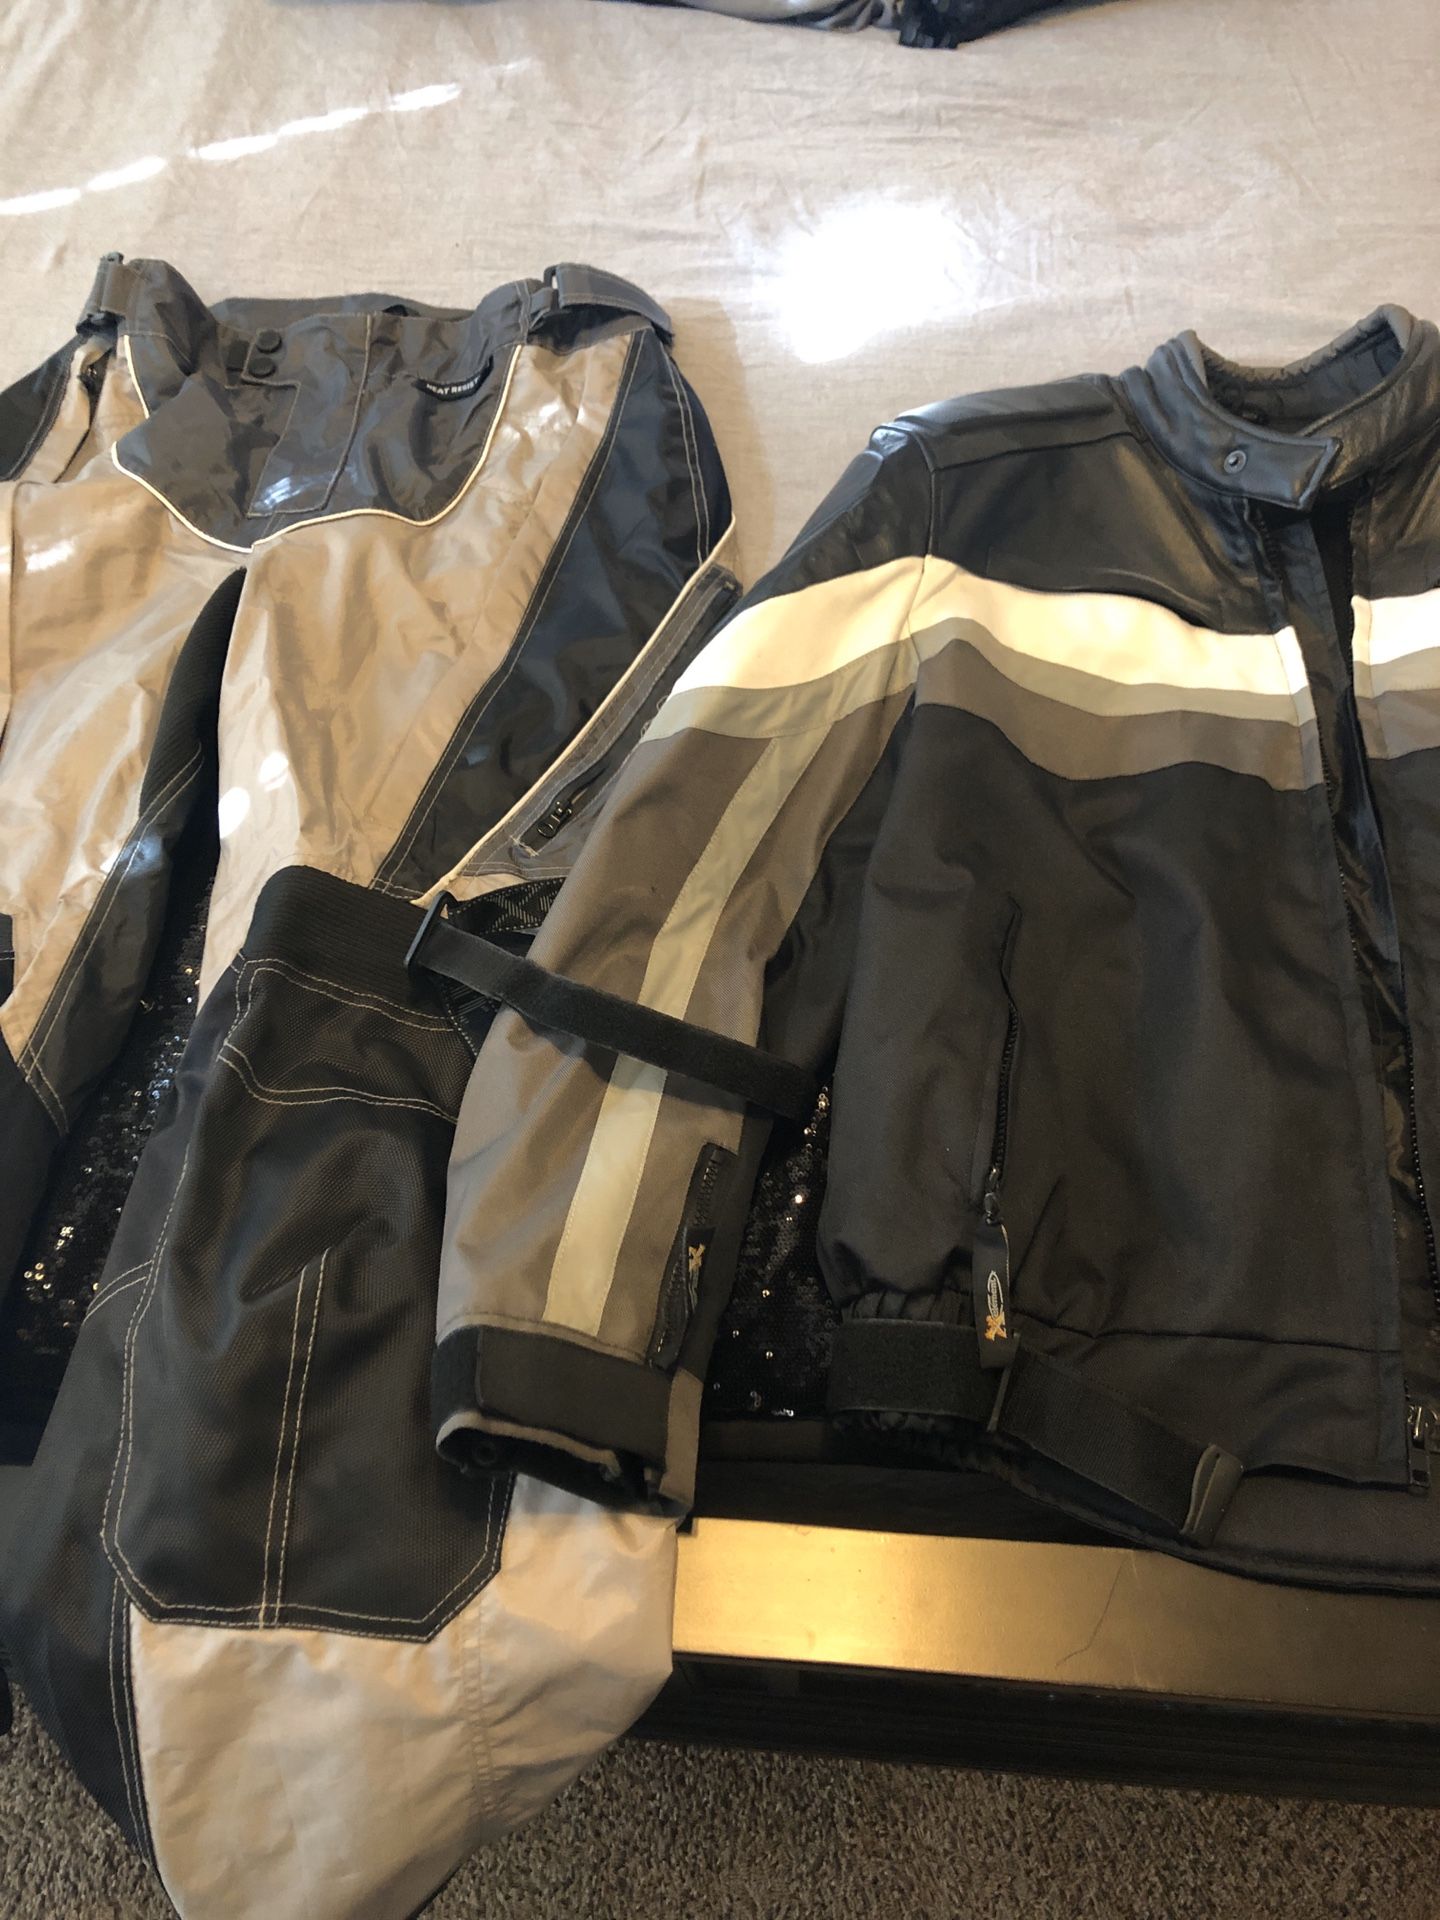 Xelement Motorcycle Gear - Jacket and Pants